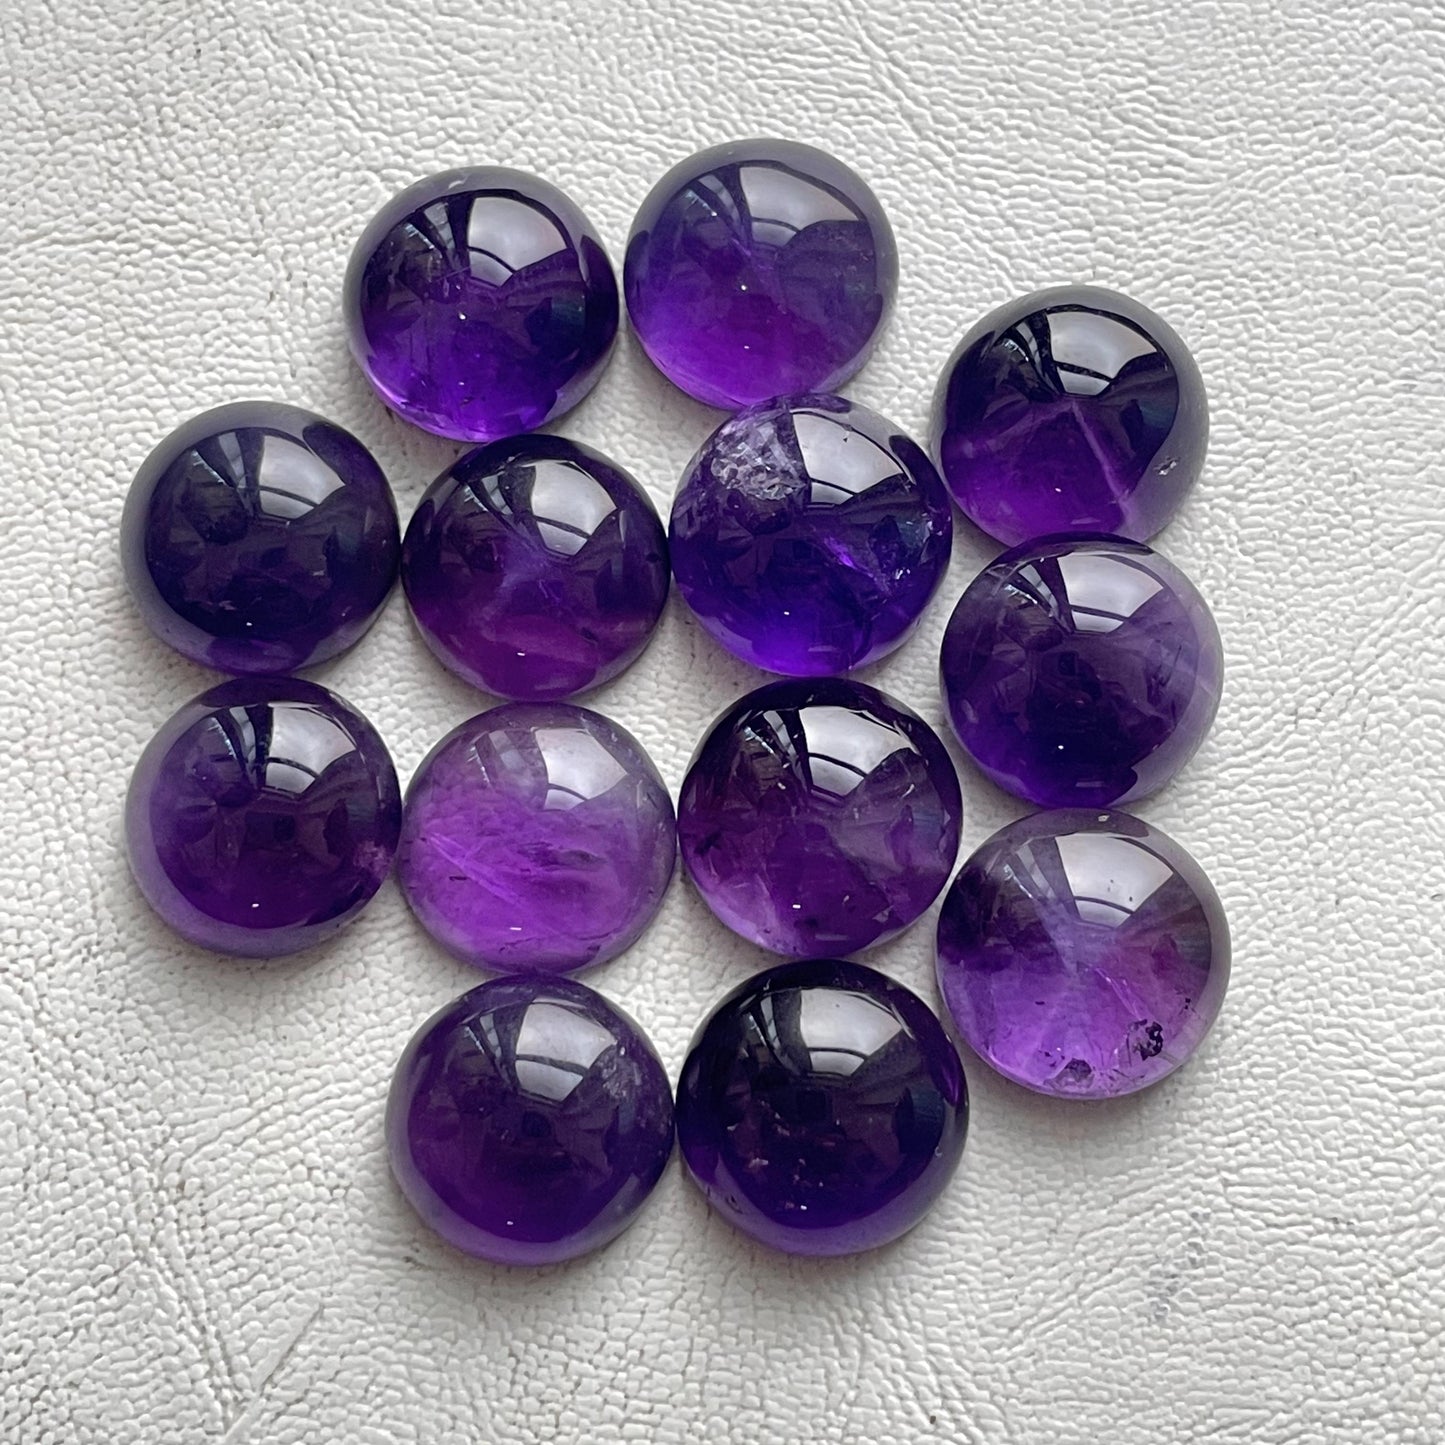 Best Quality of Purple Amethyst 15 mm Round Cabochon (Natural)